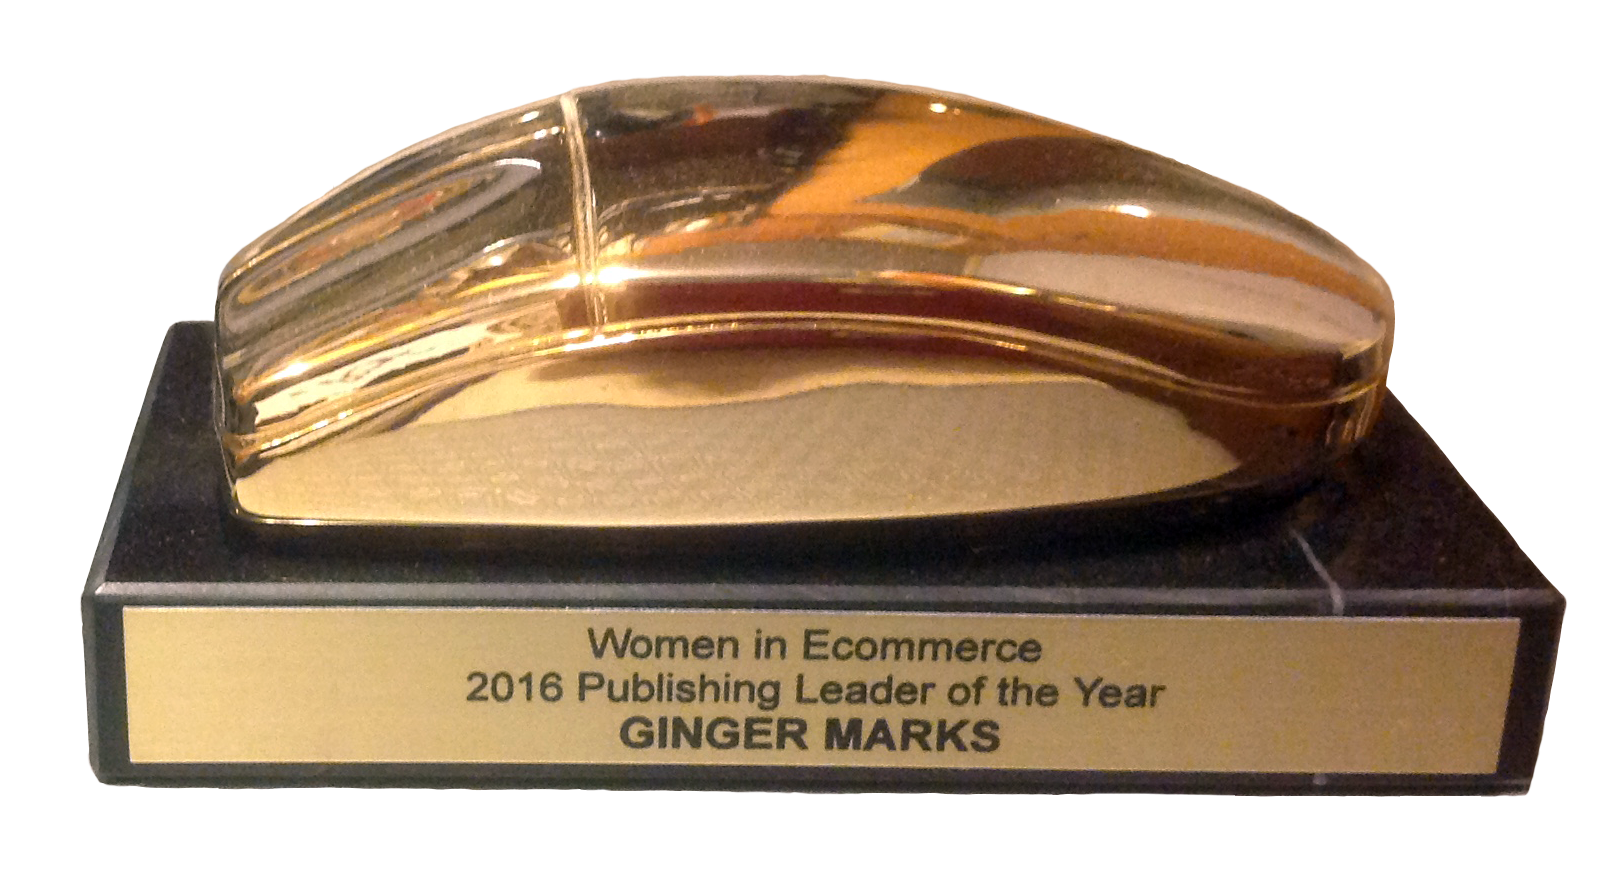 Women in Ecommerce, Publishing Leader of the Year Ginger Marks, 2016 Golden Mouse Award